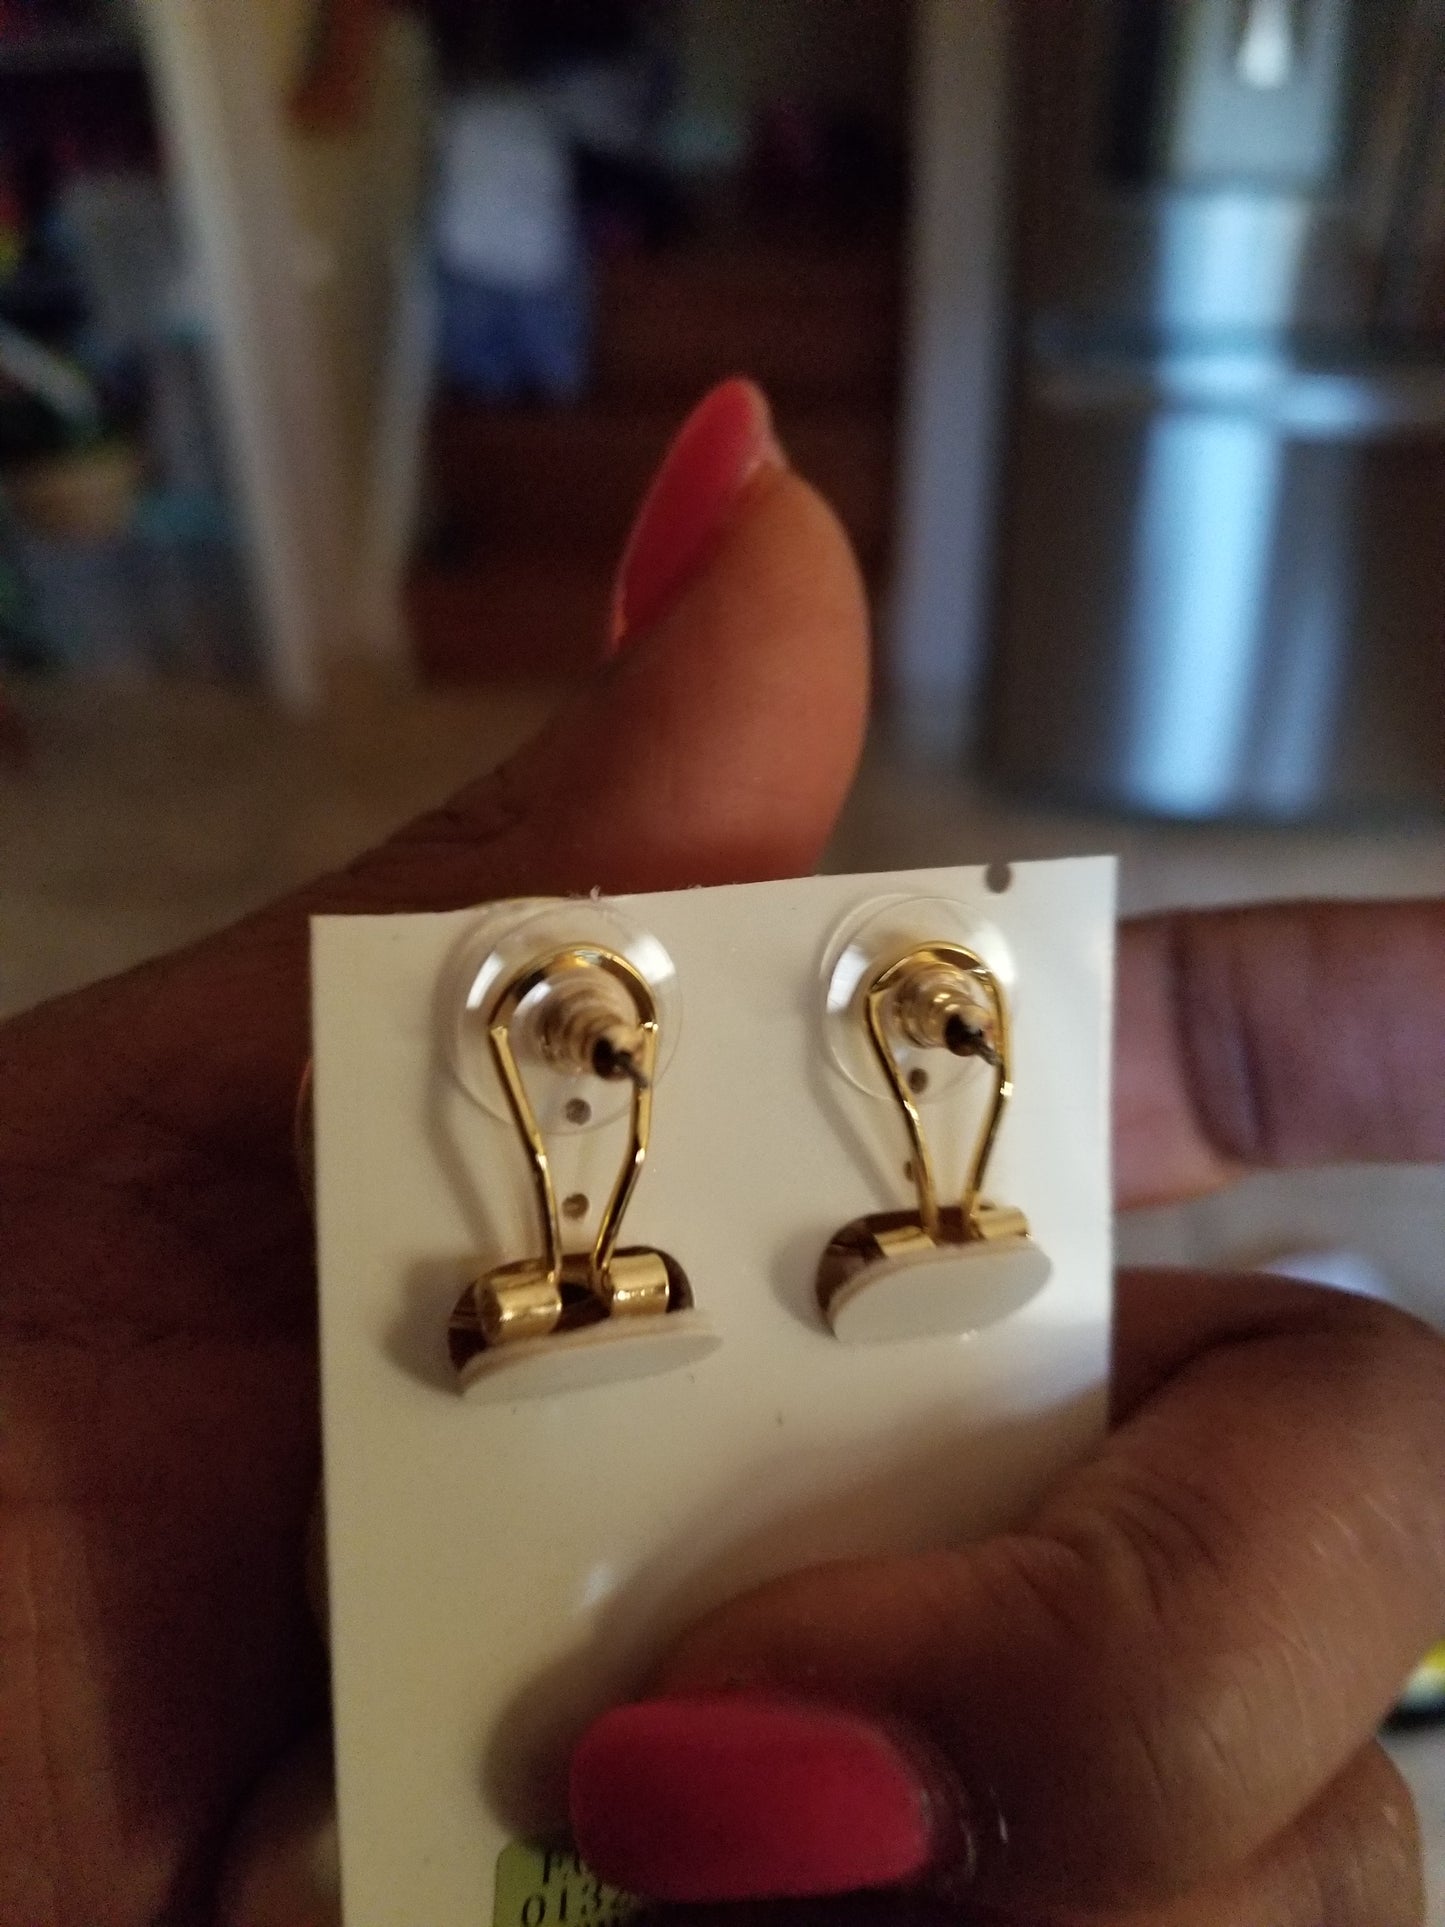 Latest drop-earrings in Gold electrroplating. Top quality made hypoallergenic. Long lasting. Light weight earrings